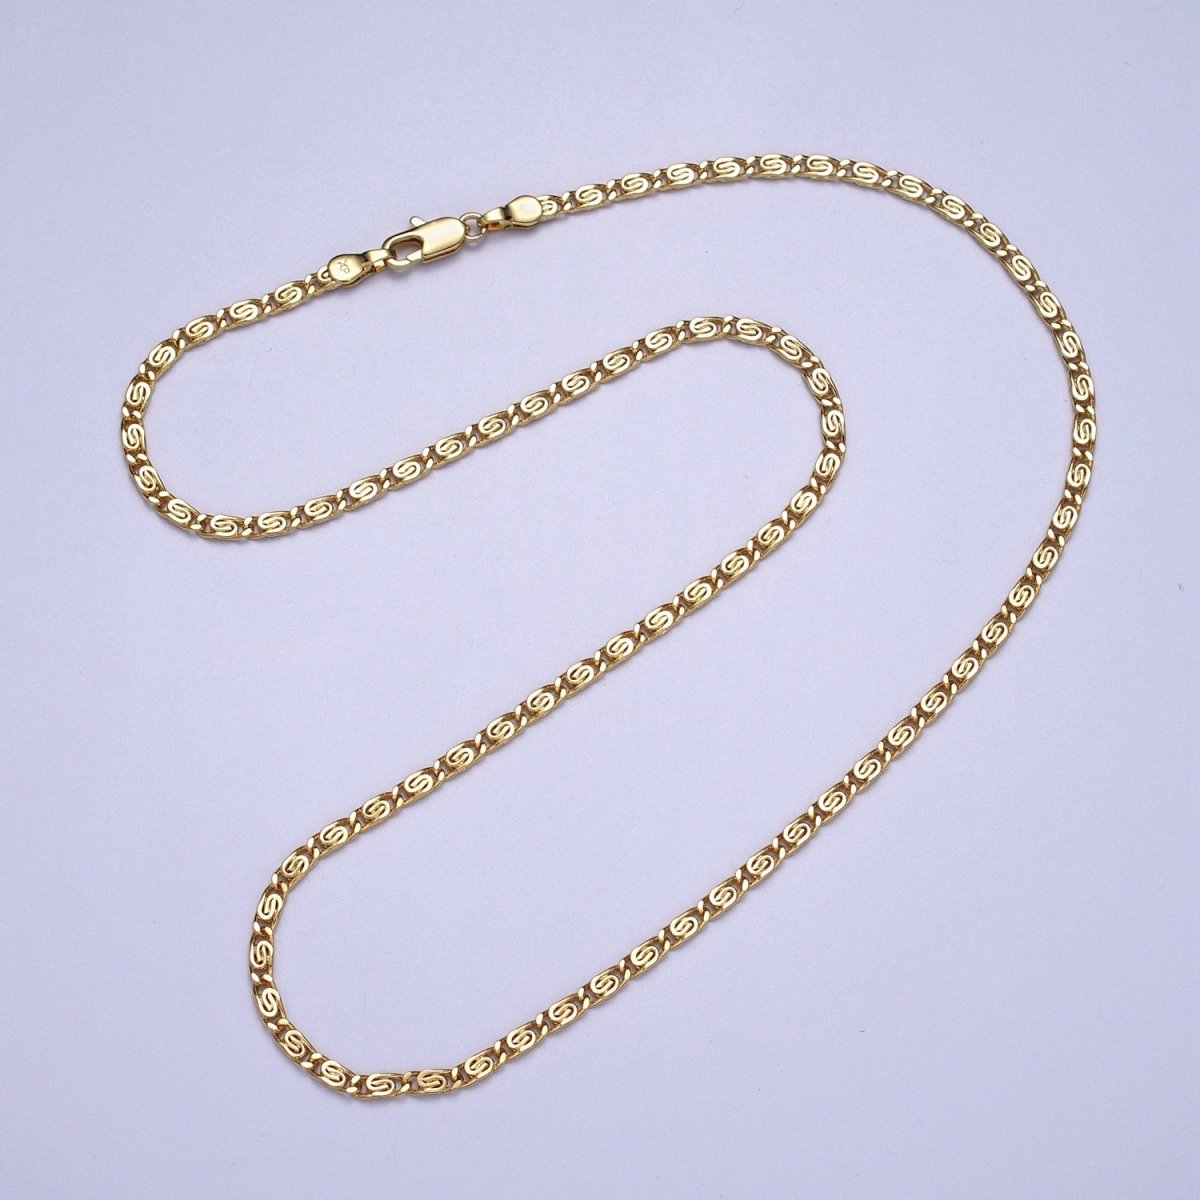 Dainty Gold Snail Chain Necklace 24K Gold Filled Scroll Chain Necklace | WA-1513 WA-1514 Clearance Pricing - DLUXCA